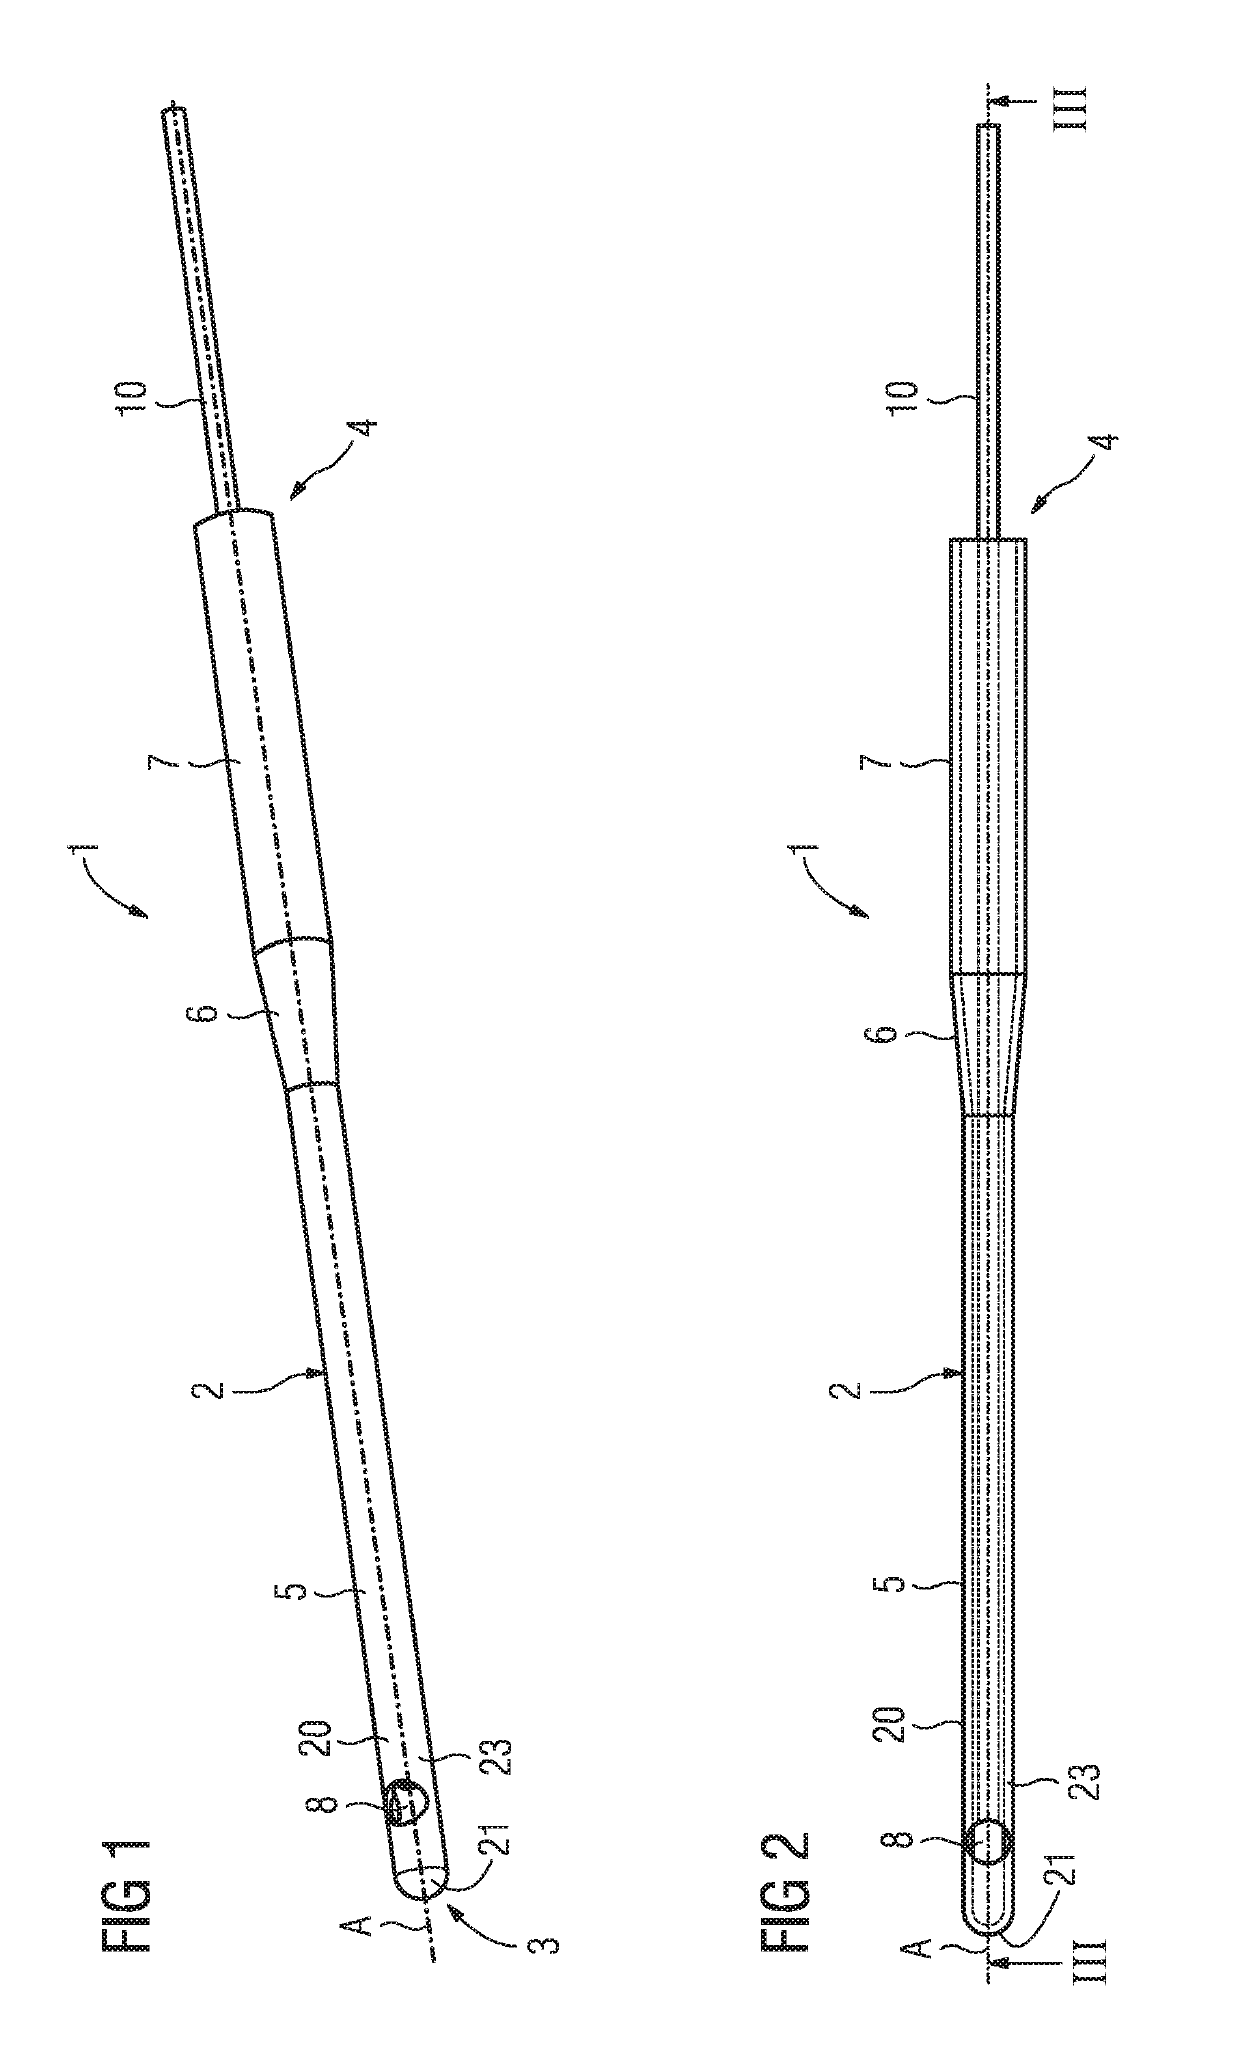 Applicator and device for cell treatment